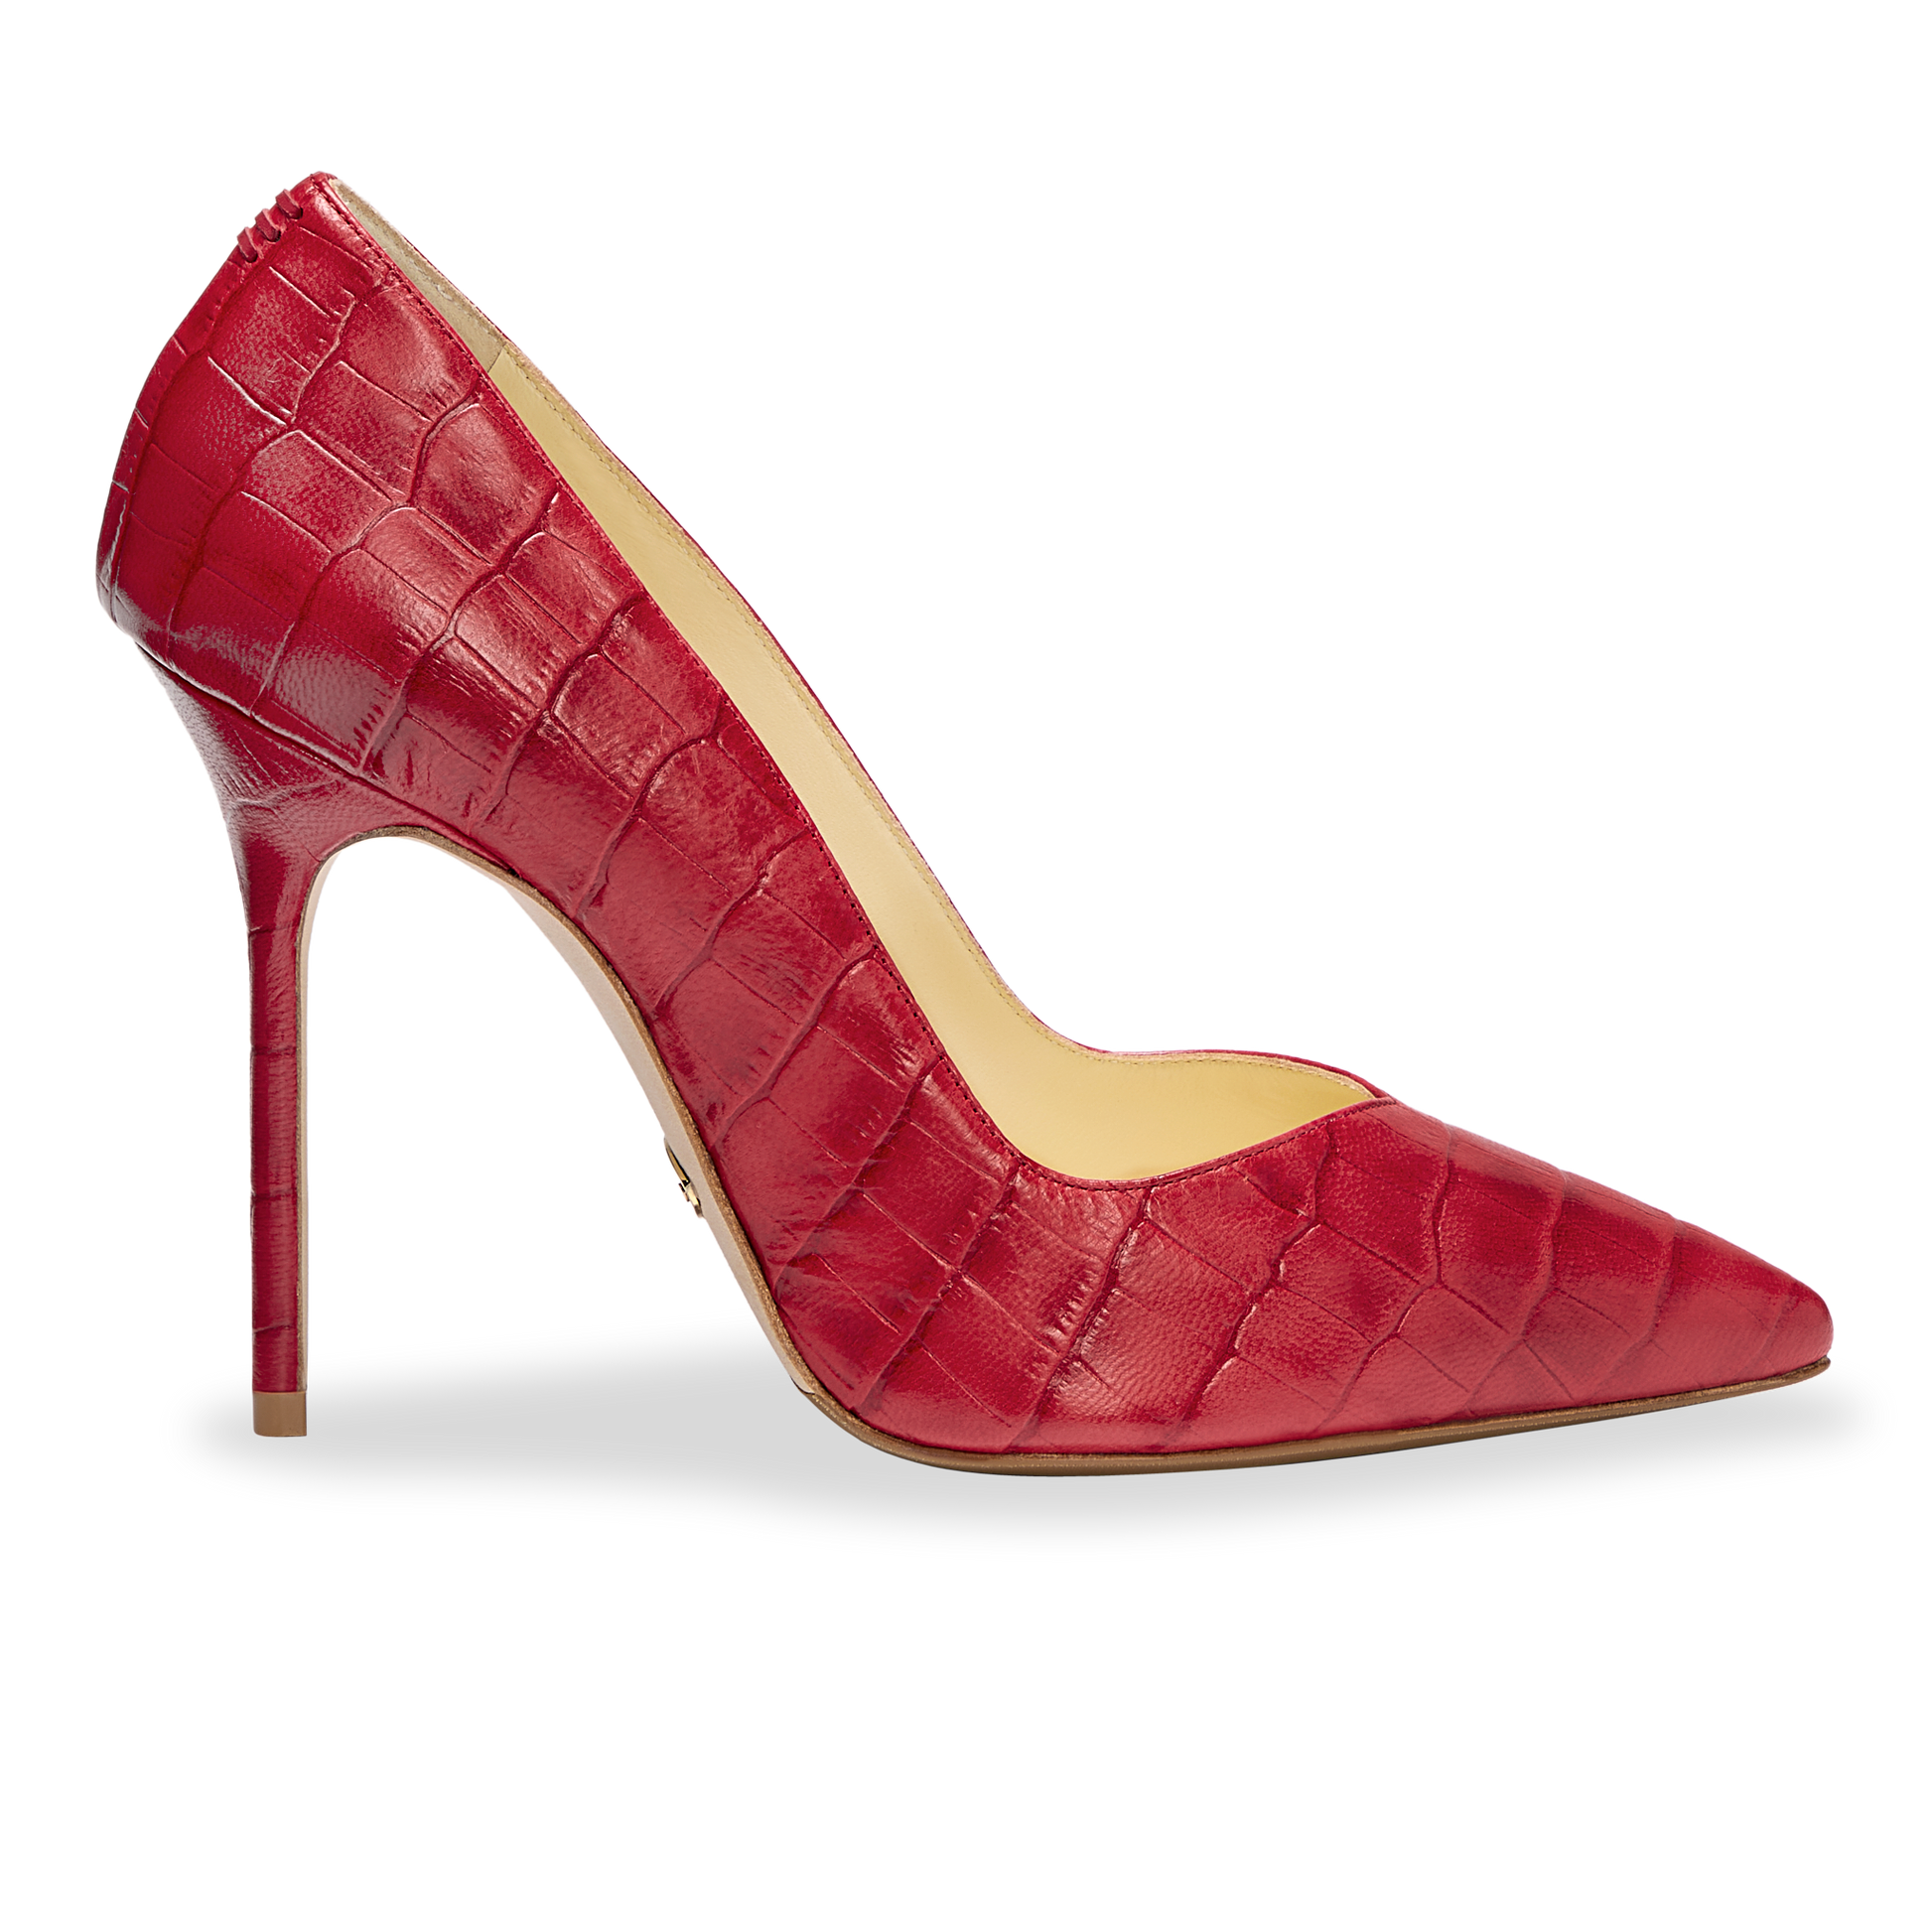 Perfect Pump 100 in Red Croc Embossed Nappa